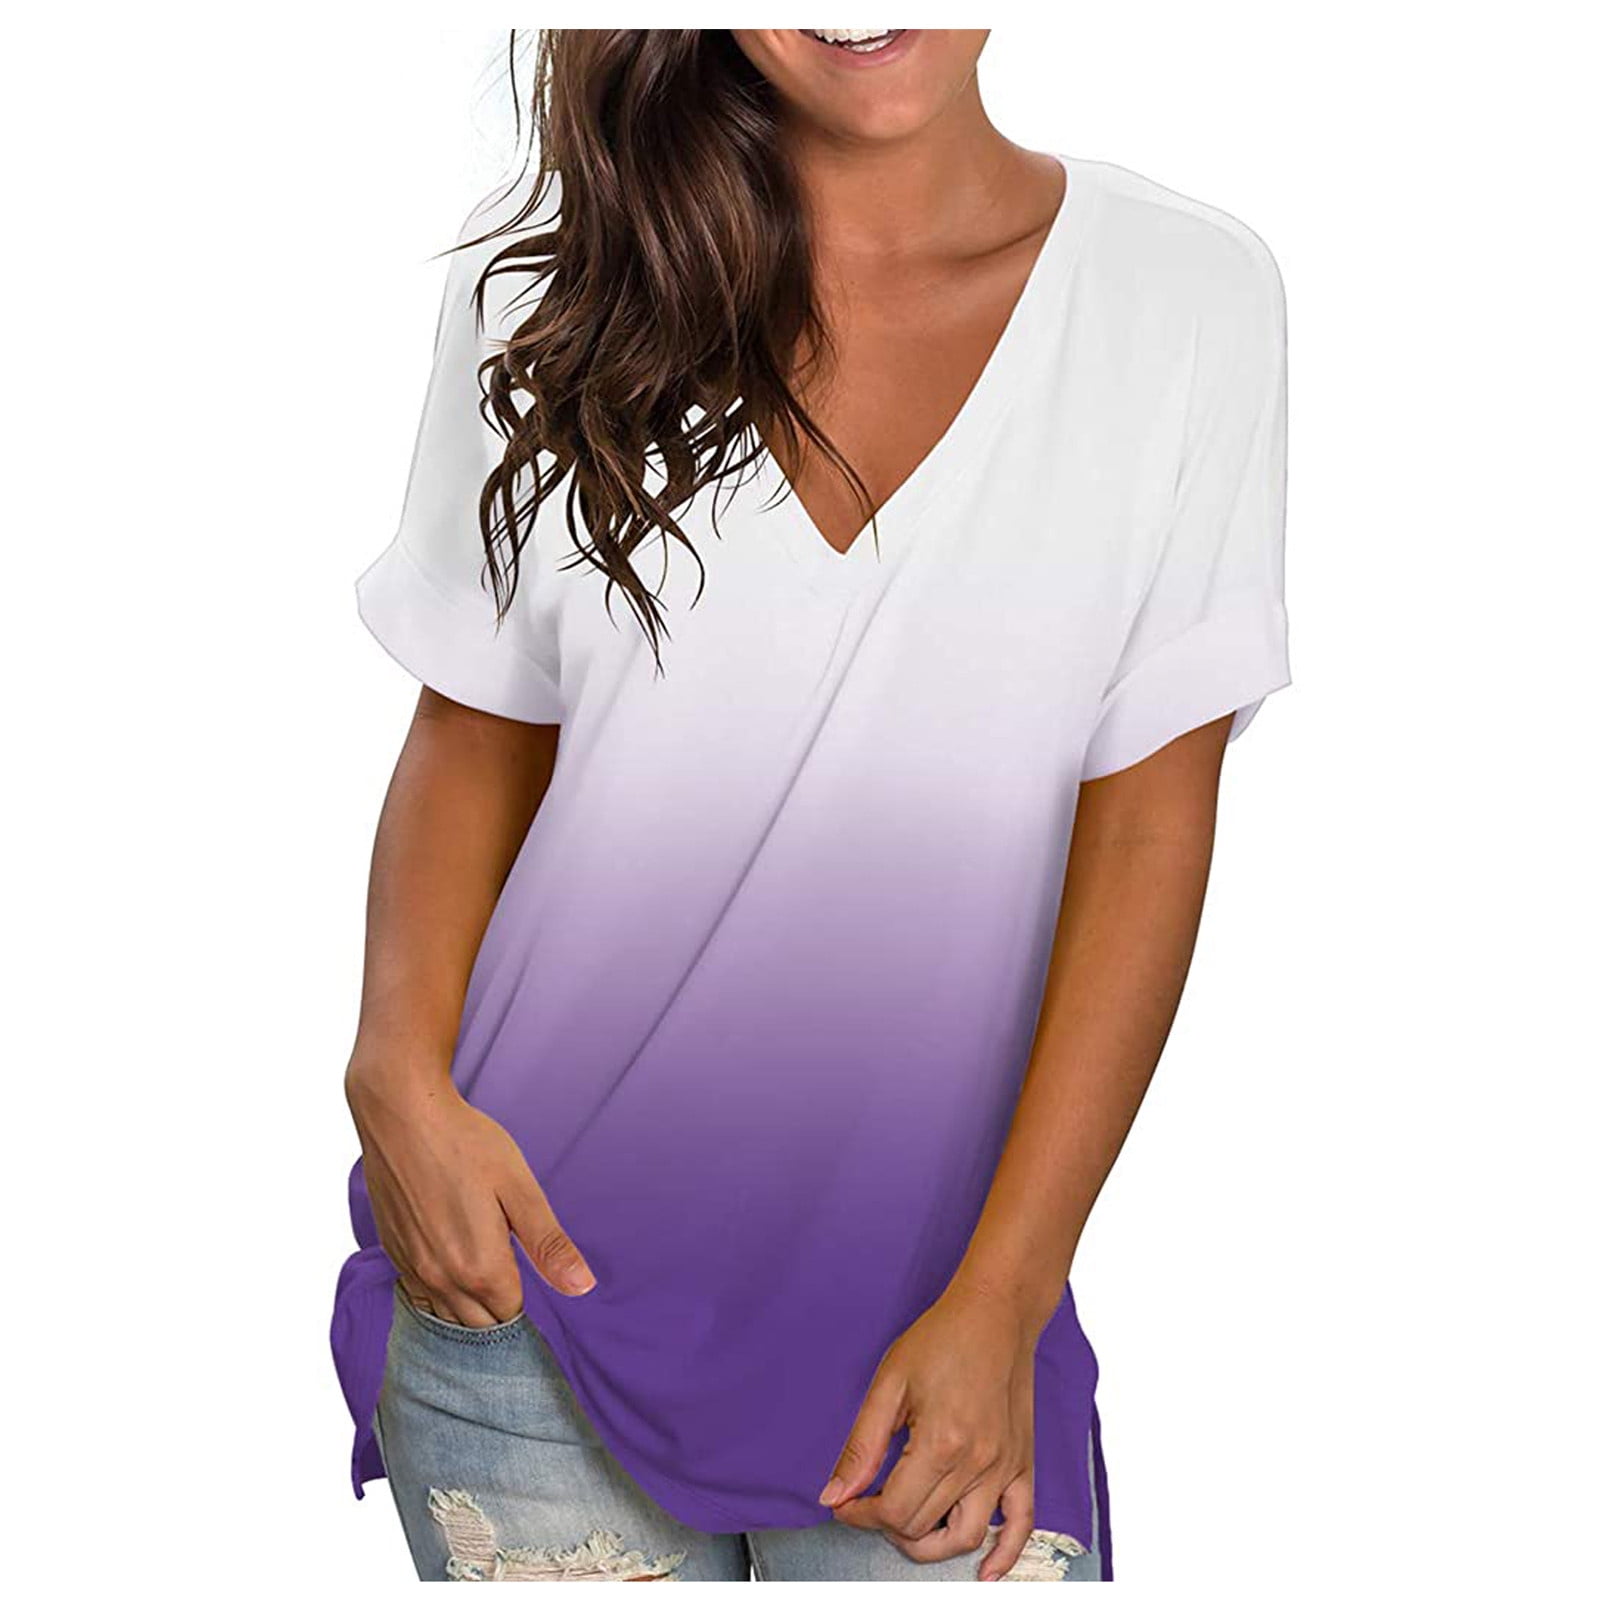 Womens Fashion Gradient T Shirt Casual V-Neck Roll Up Short Sleeve Summer Tops Loose Fit Tie Dye Tunic Blouse Tee